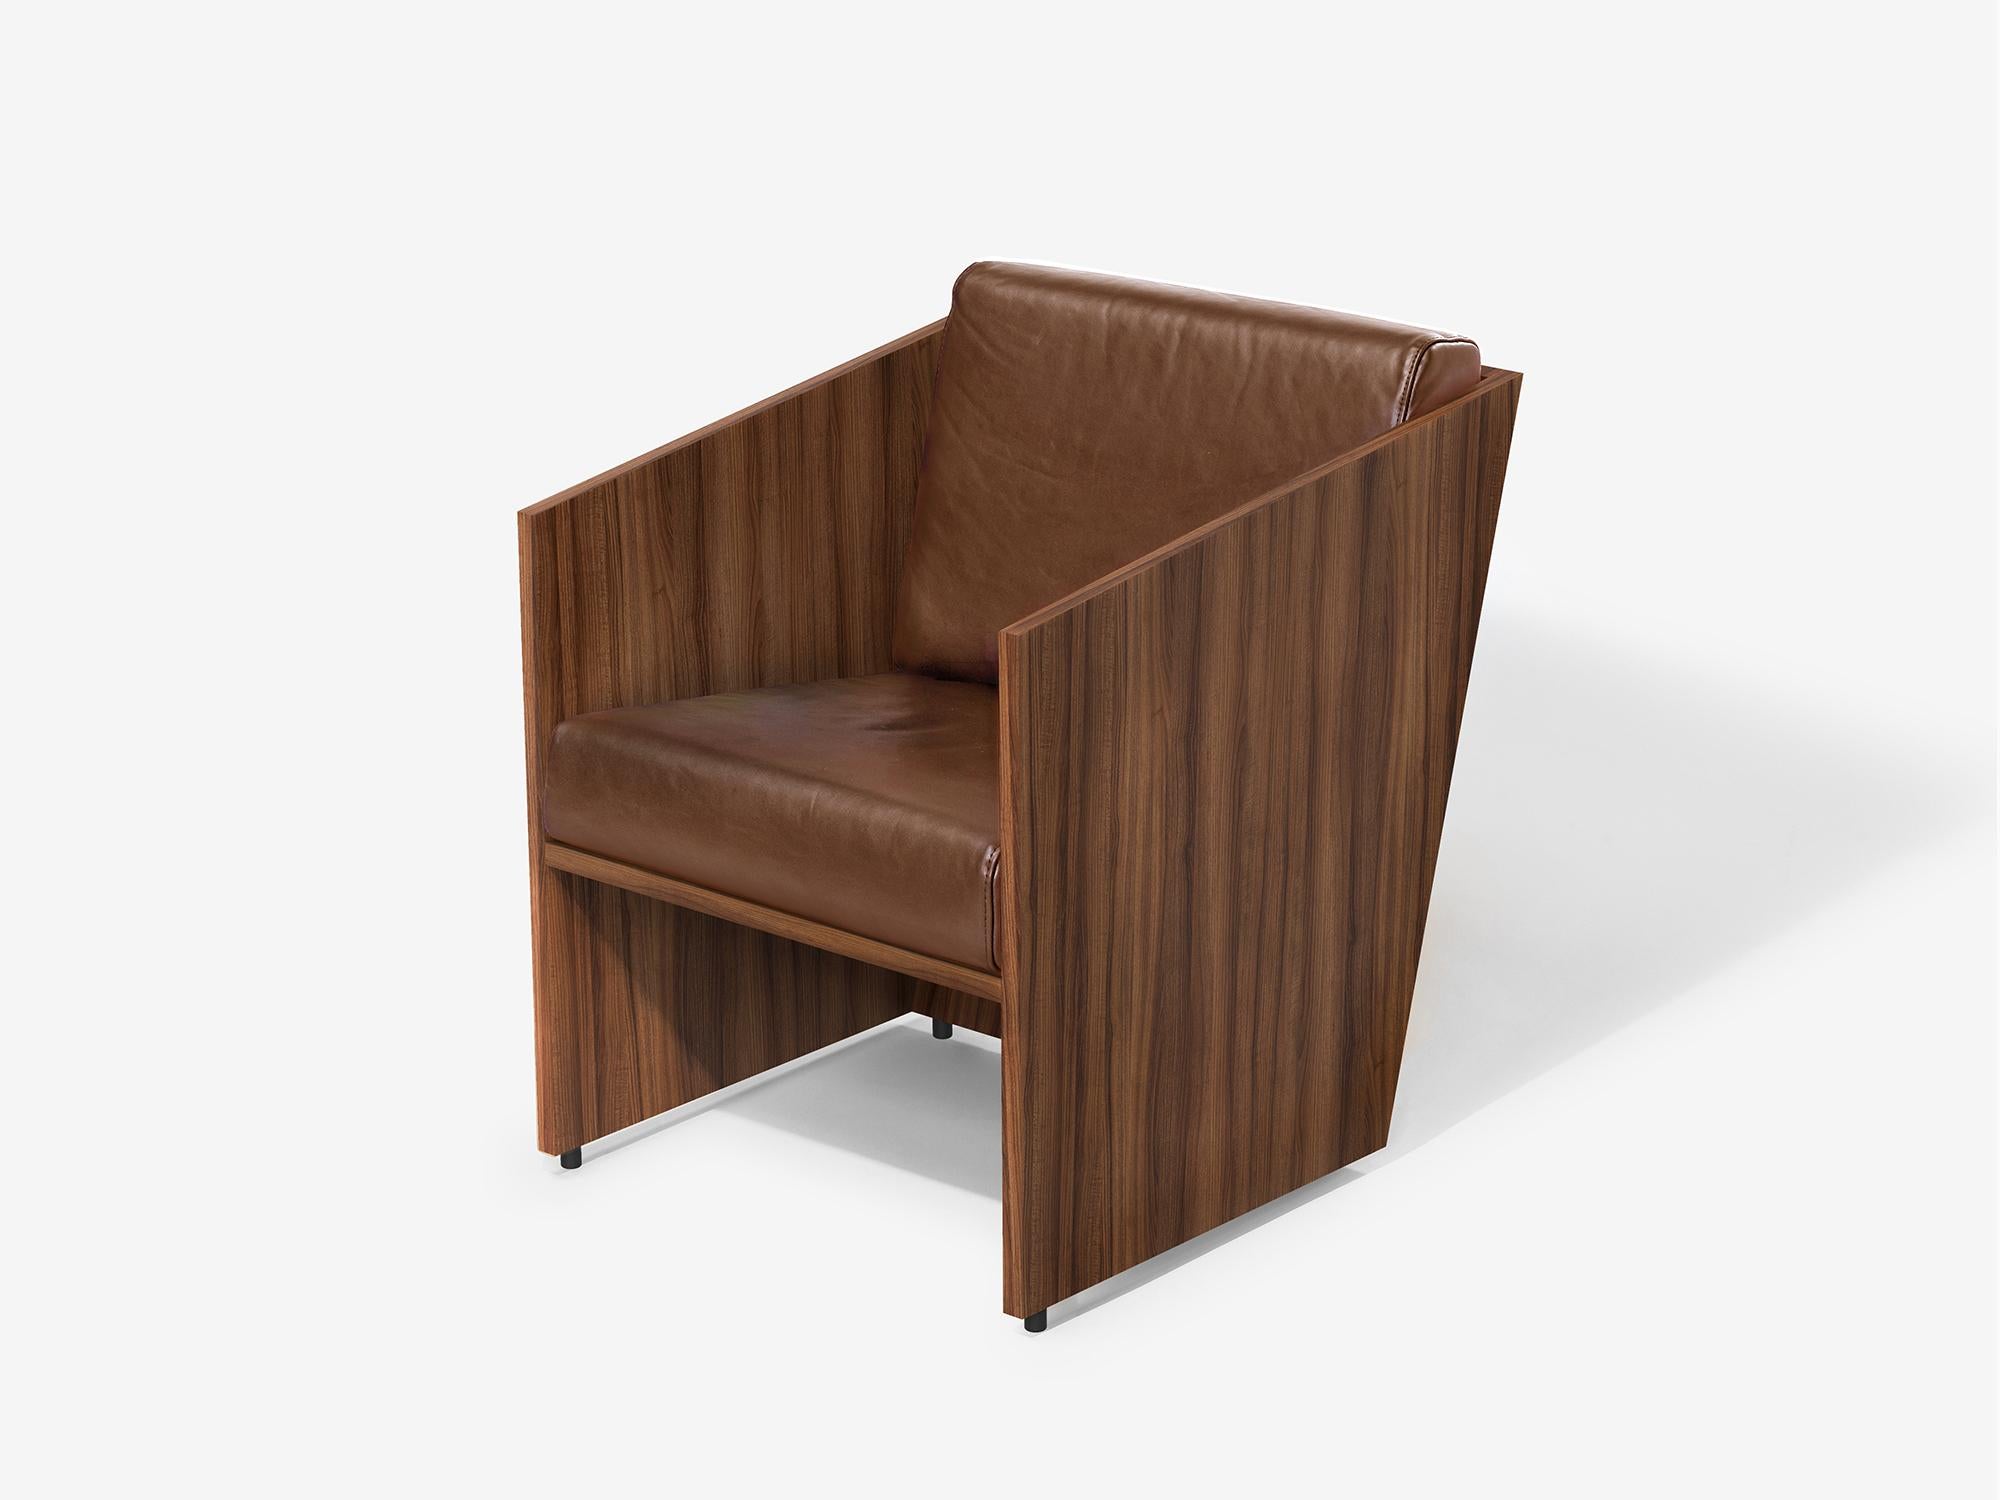 Hand-Crafted Álvaro Siza Vieira - Armchair in Walnut Wood and Natural Leather - one of a kind For Sale